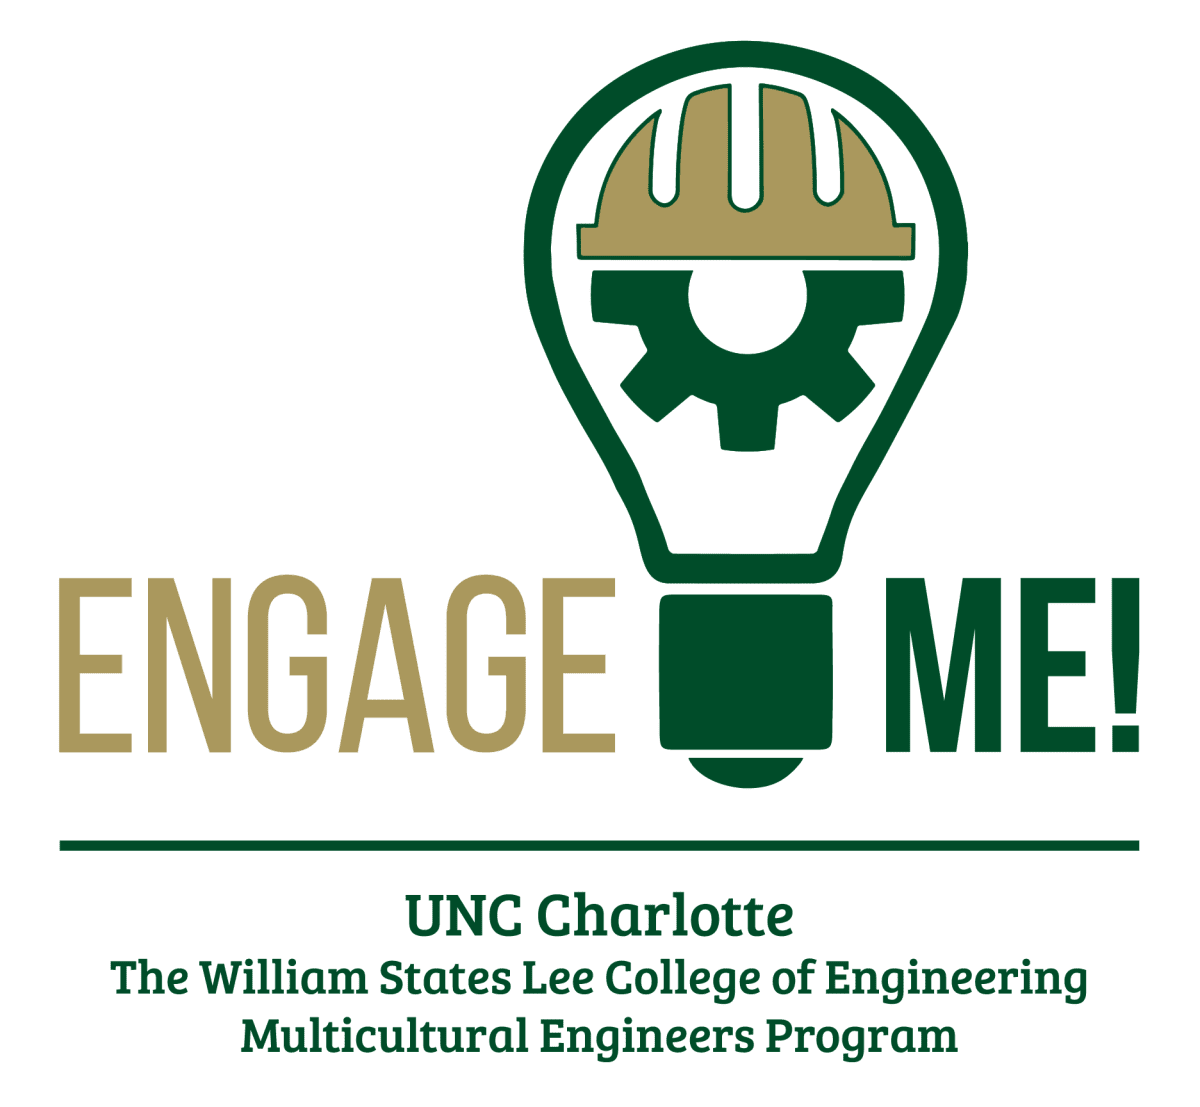 Engage me! UNC Charlotte The William States Lee College of Engineering Multicultural Engineers Program